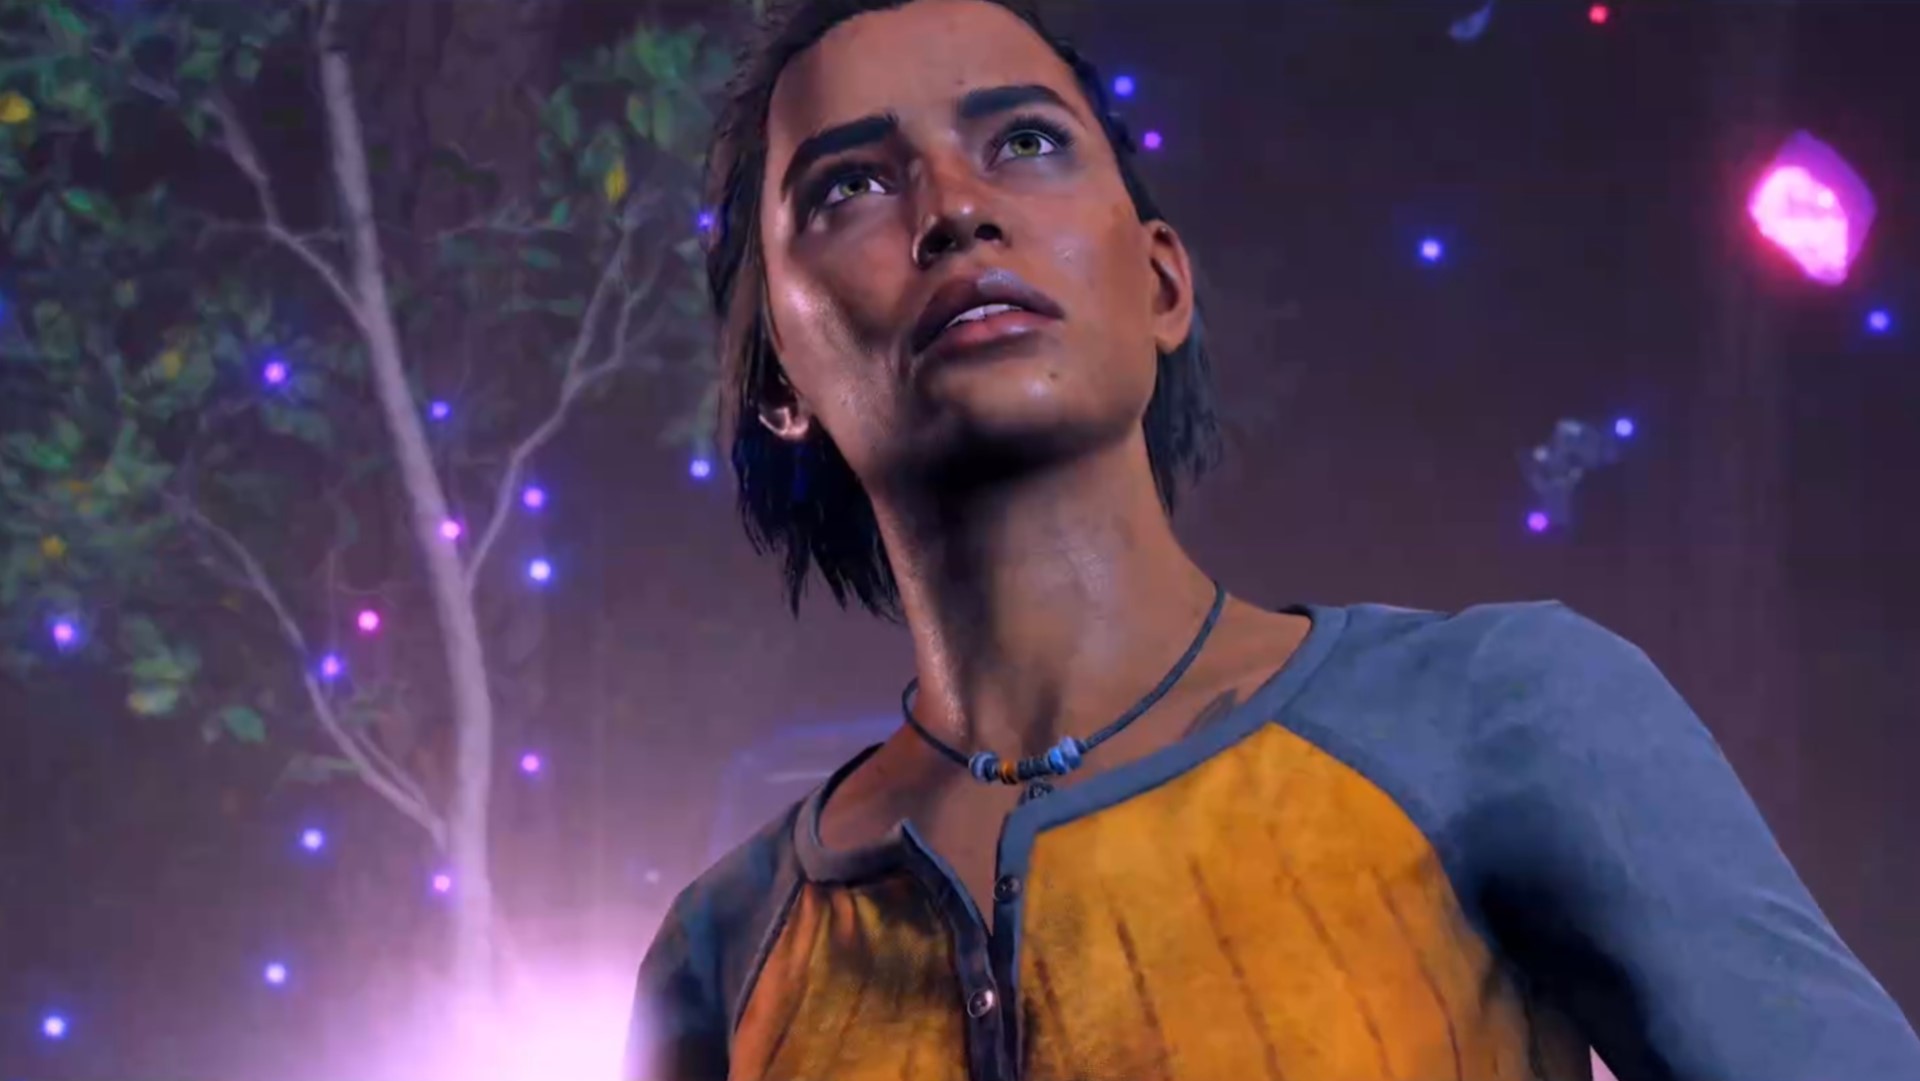 Far Cry 6 expansion includes alien life forms and reality-bending adventures